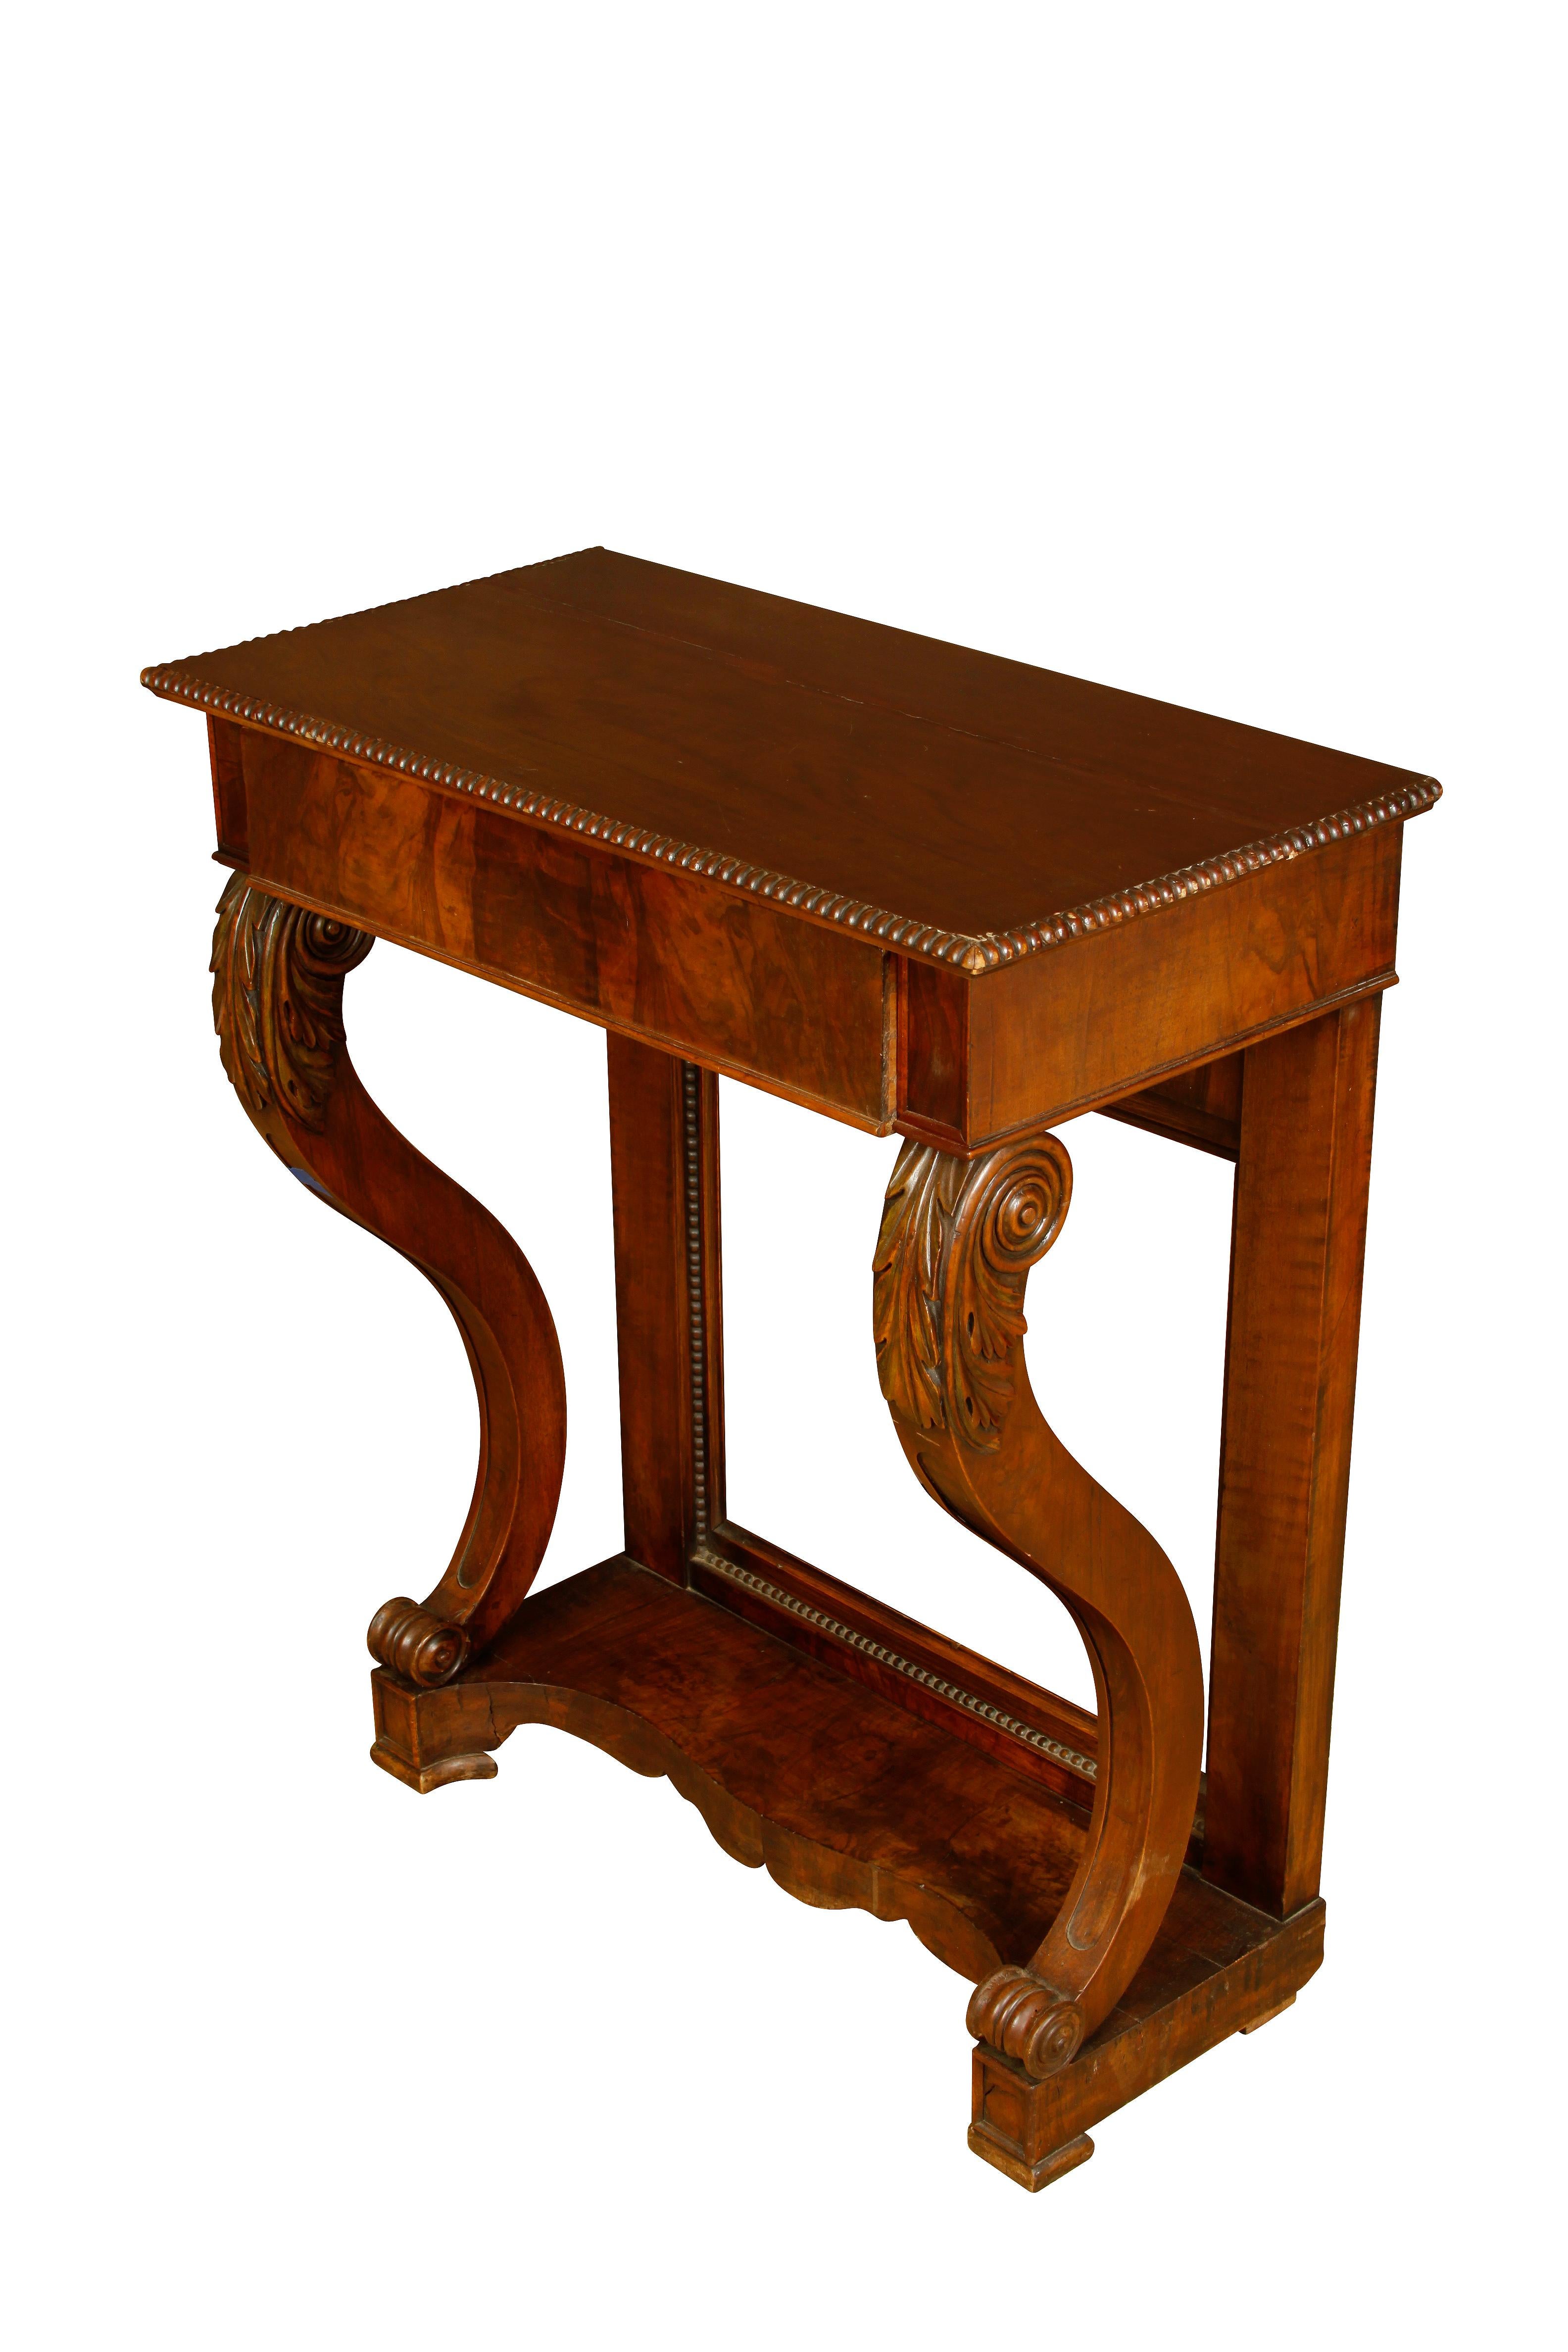 Empire style American mahogany console with carved edge top with single drawer and acanthus carved details to cabriole legs.